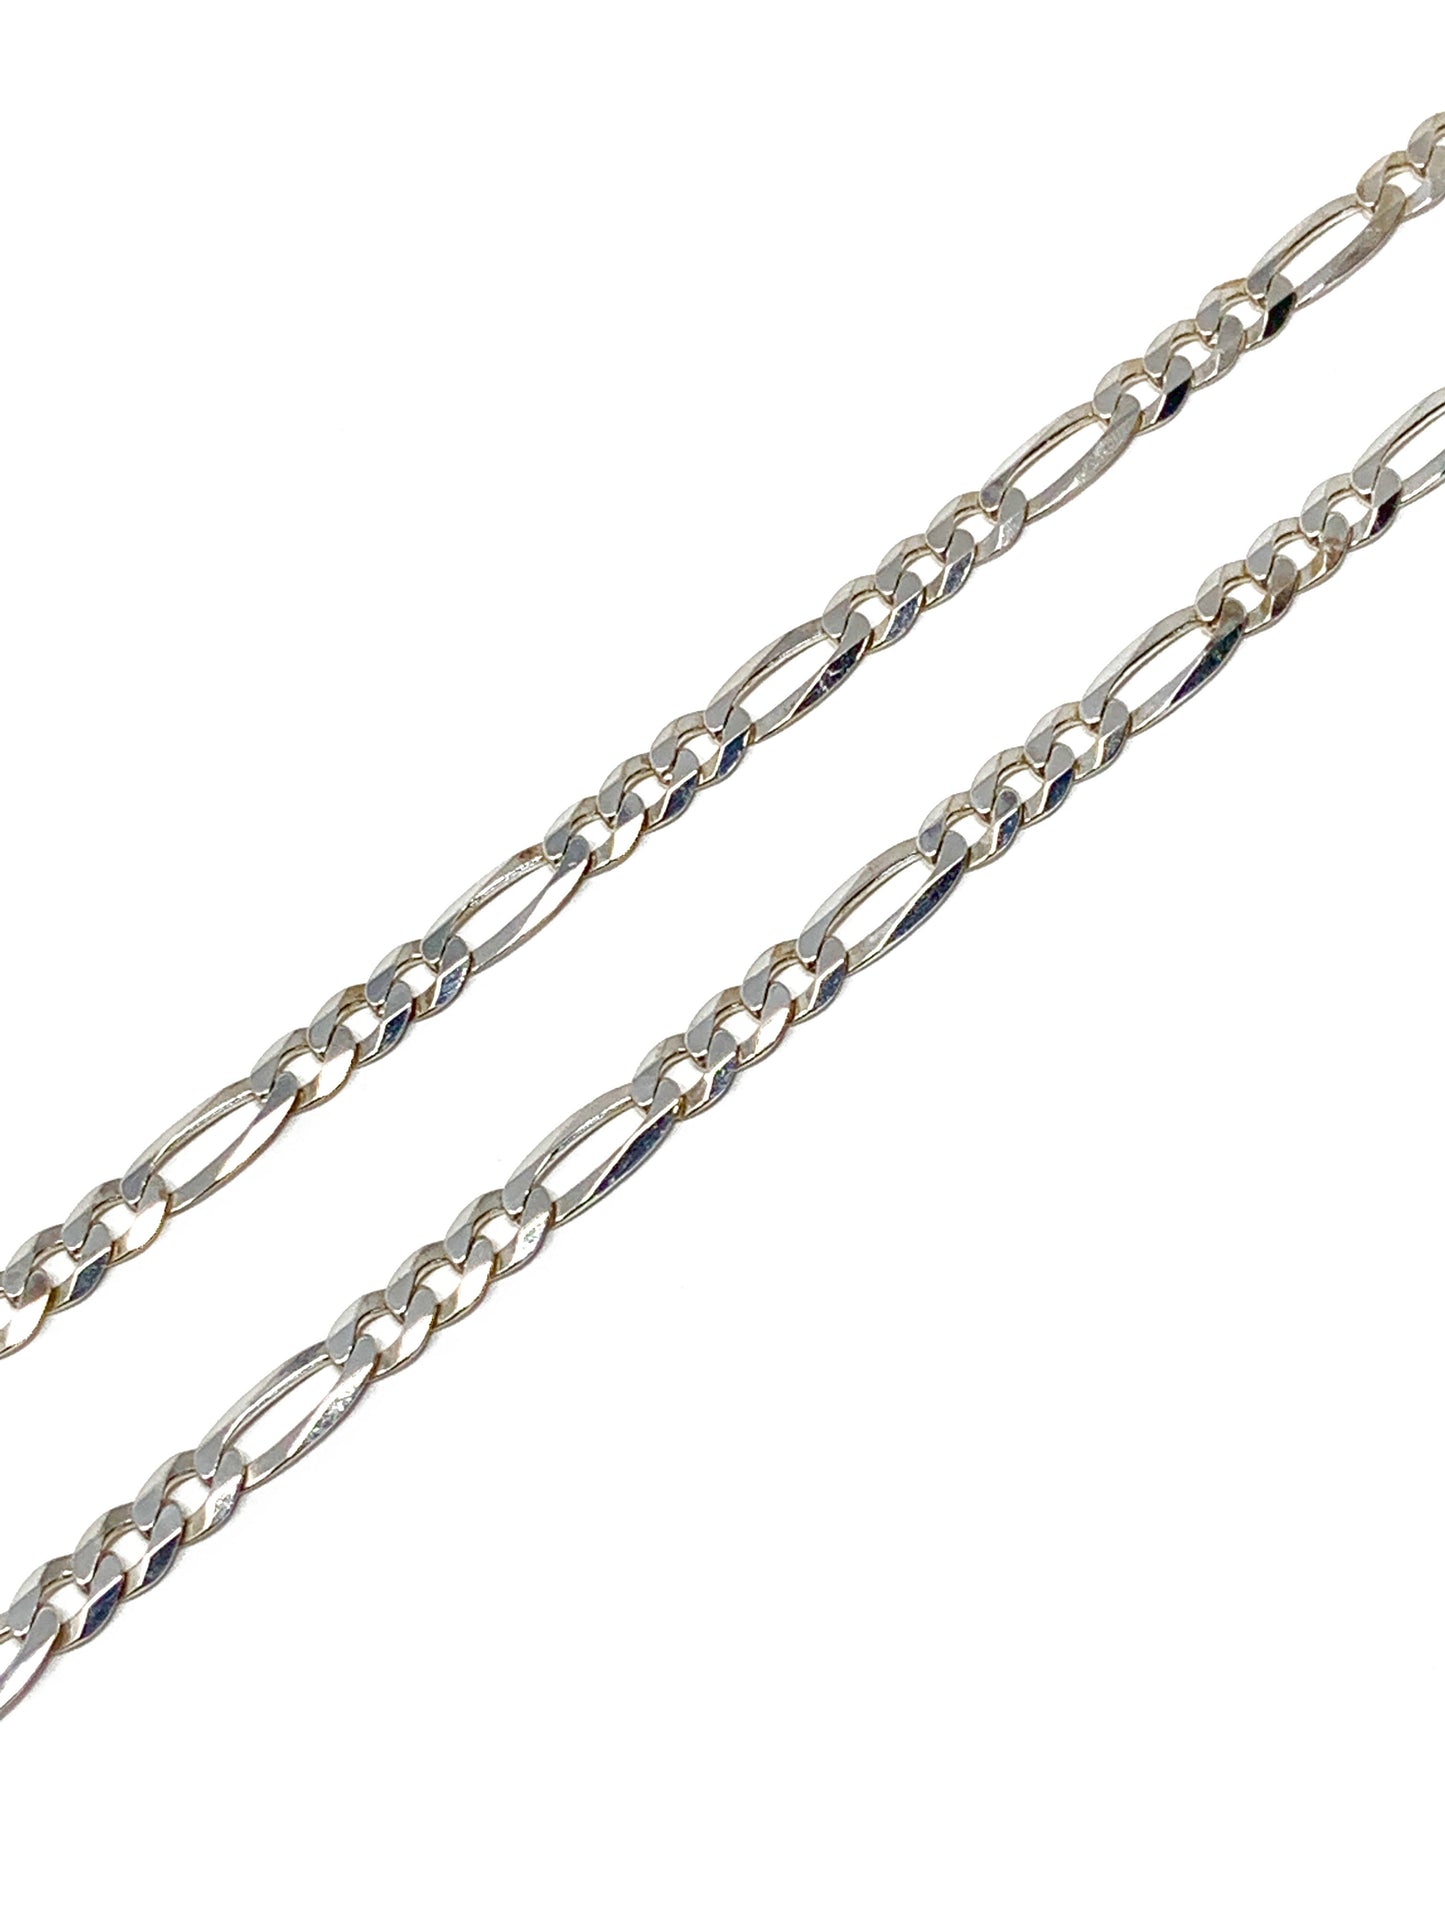 Silver .925 Figaro Link Necklace